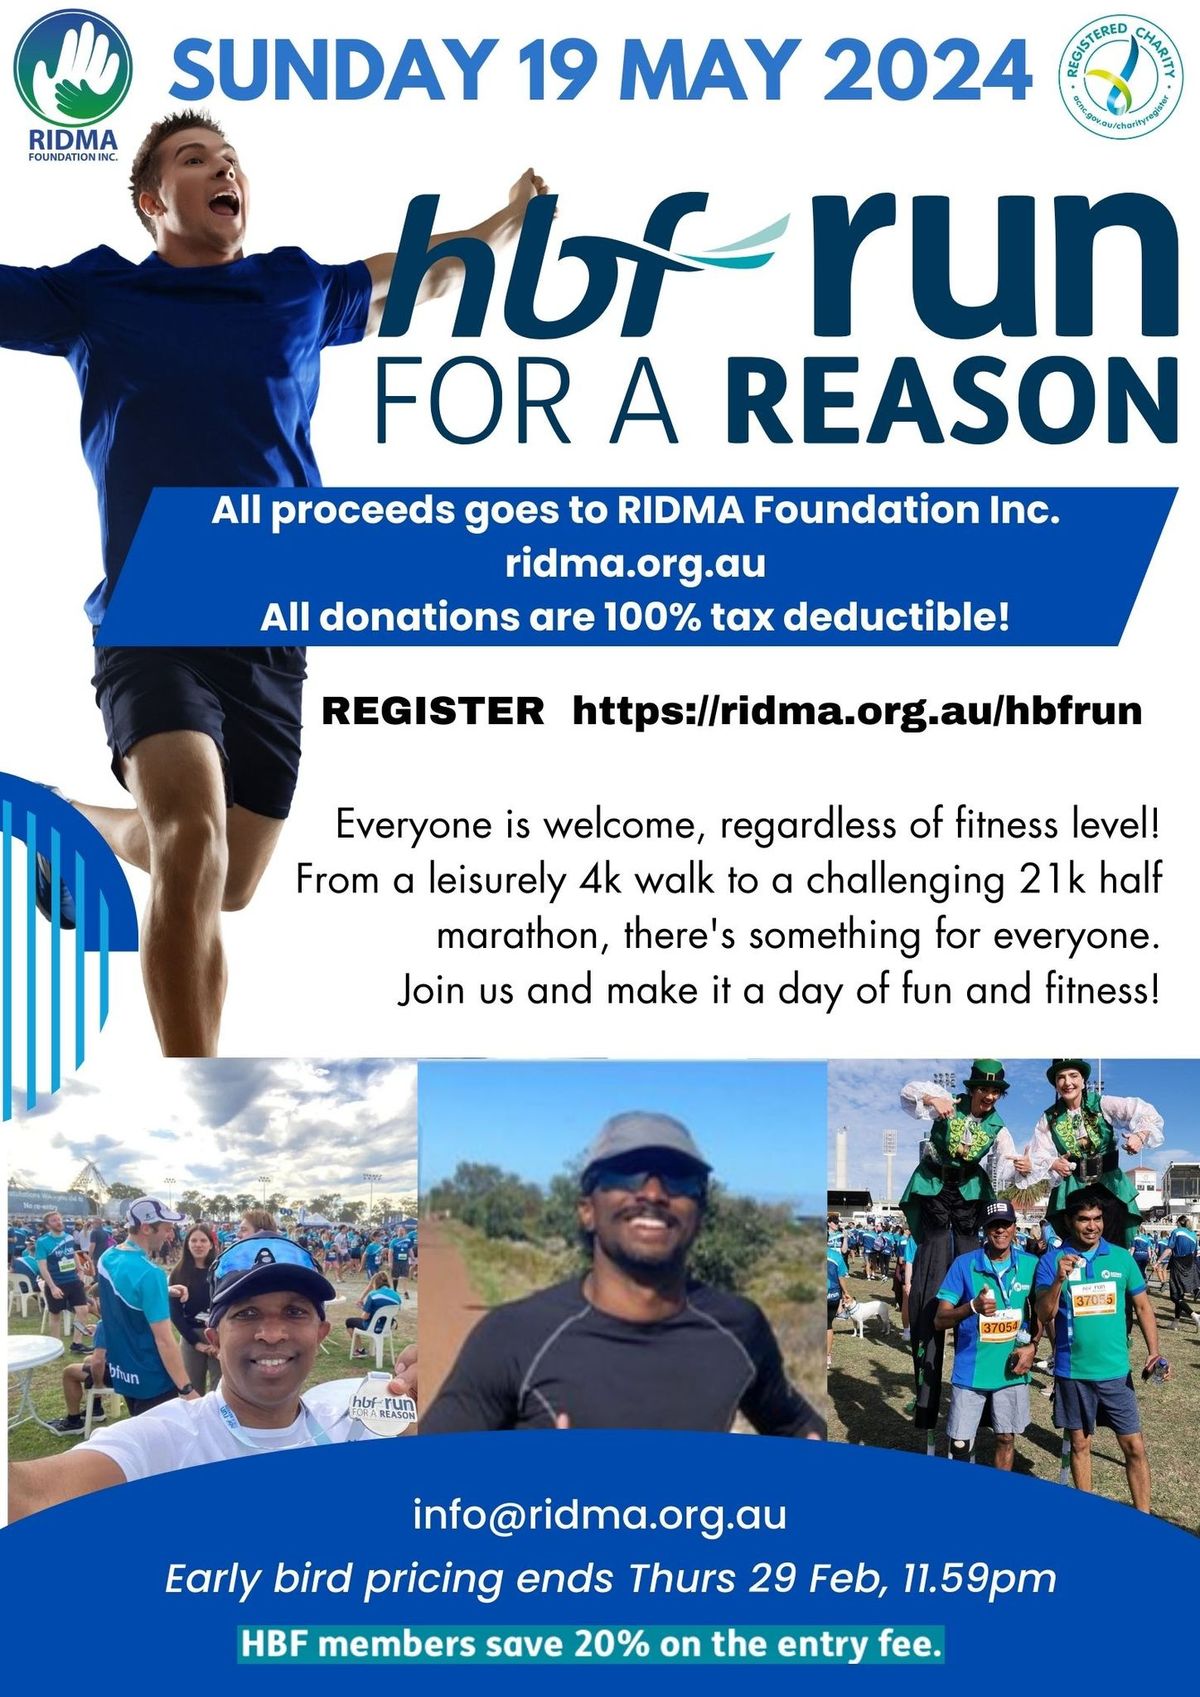 HBF Run for a Reason is back on Sunday 19 May!